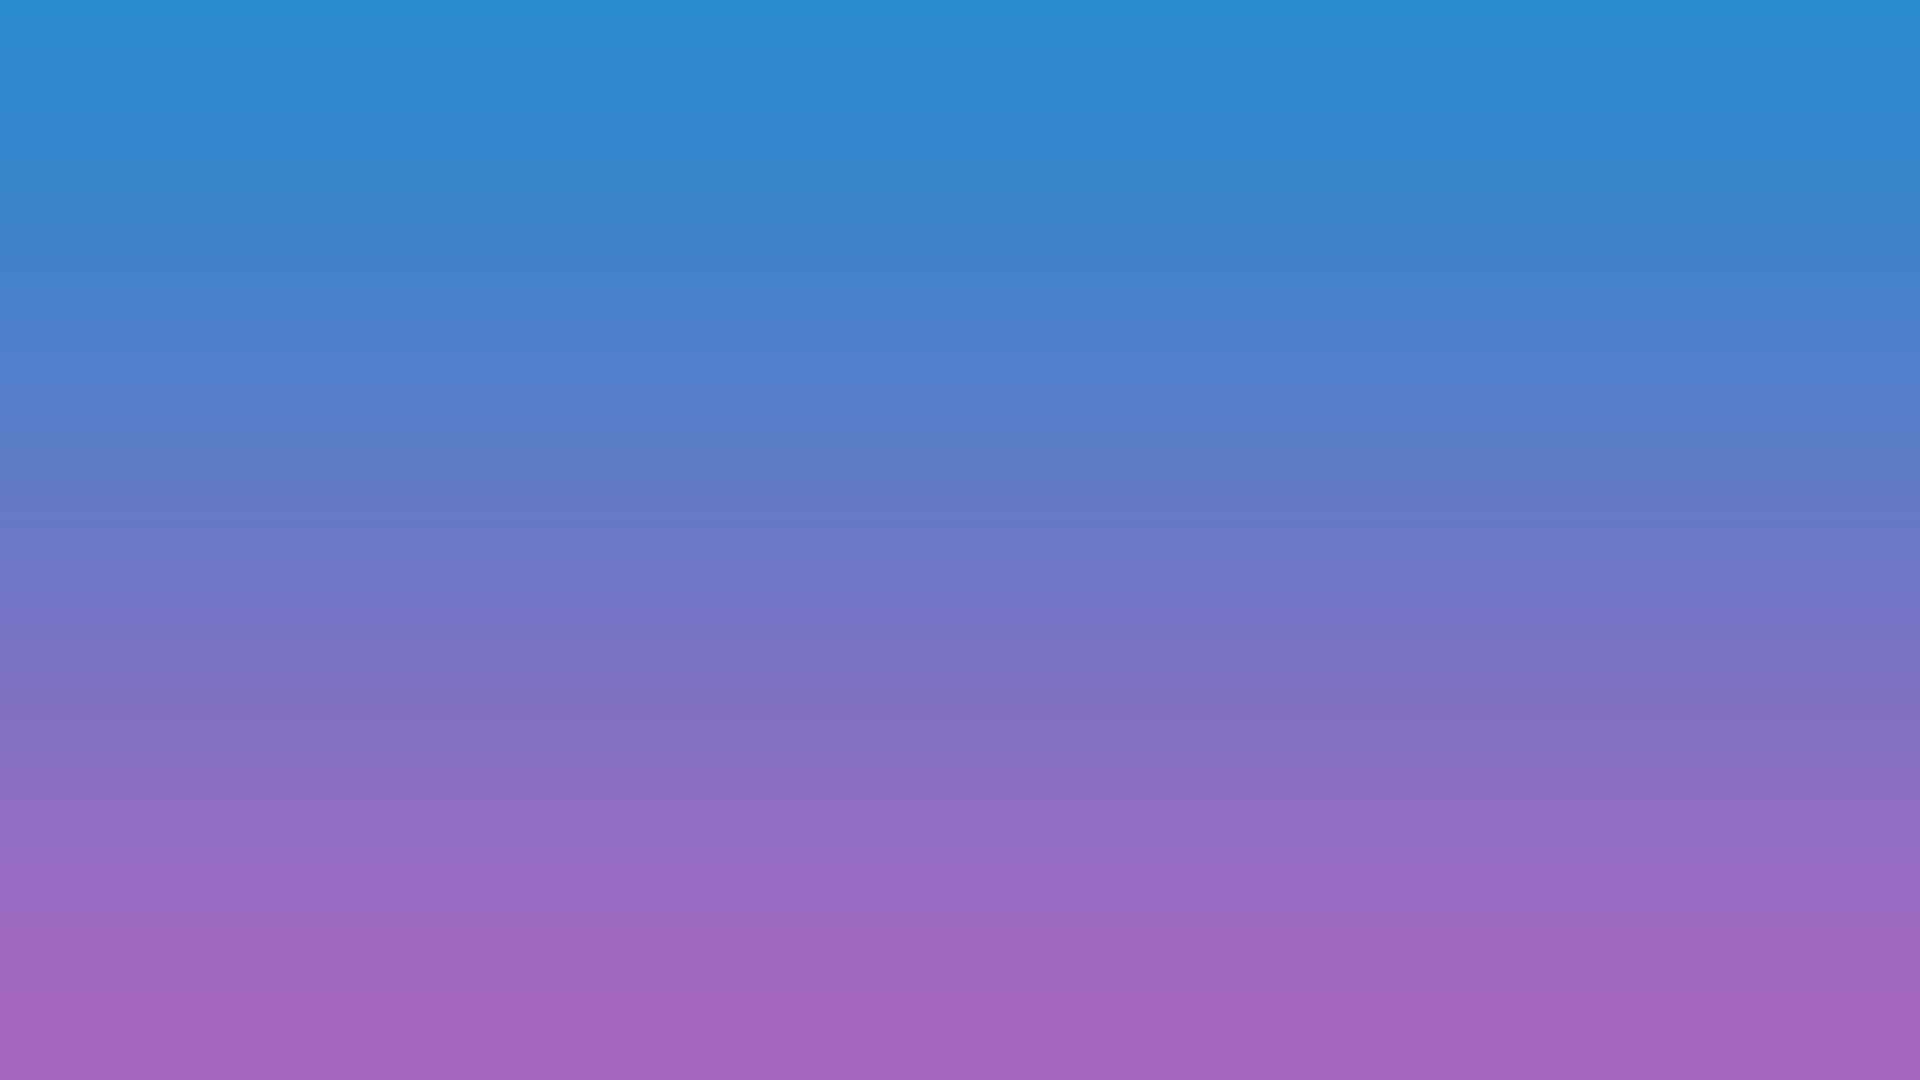 Subtle ombré gradient in shades of blue and purple Wallpaper